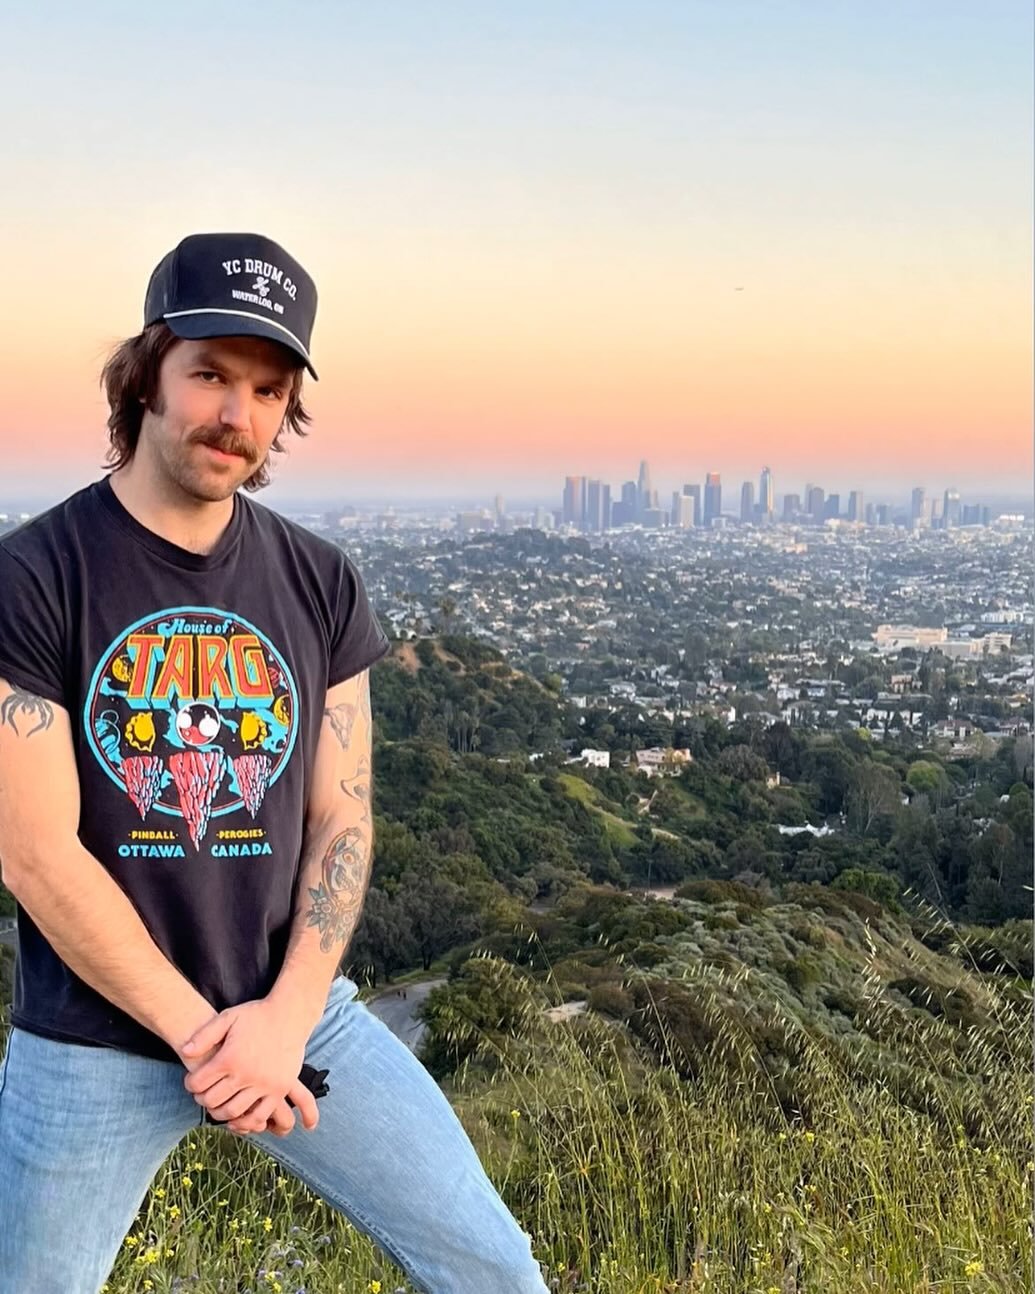 *SPOTTED!* Our good friend @sammy.j.scorpion rockin&rsquo; a classic TARG tee overlooking LA - awesome!! We&rsquo;ve got an amazing week of shows coming your way Ottawa - check out our listings and join us!!! 🙂👾🙂

Shows/Listings here:
http://www.h